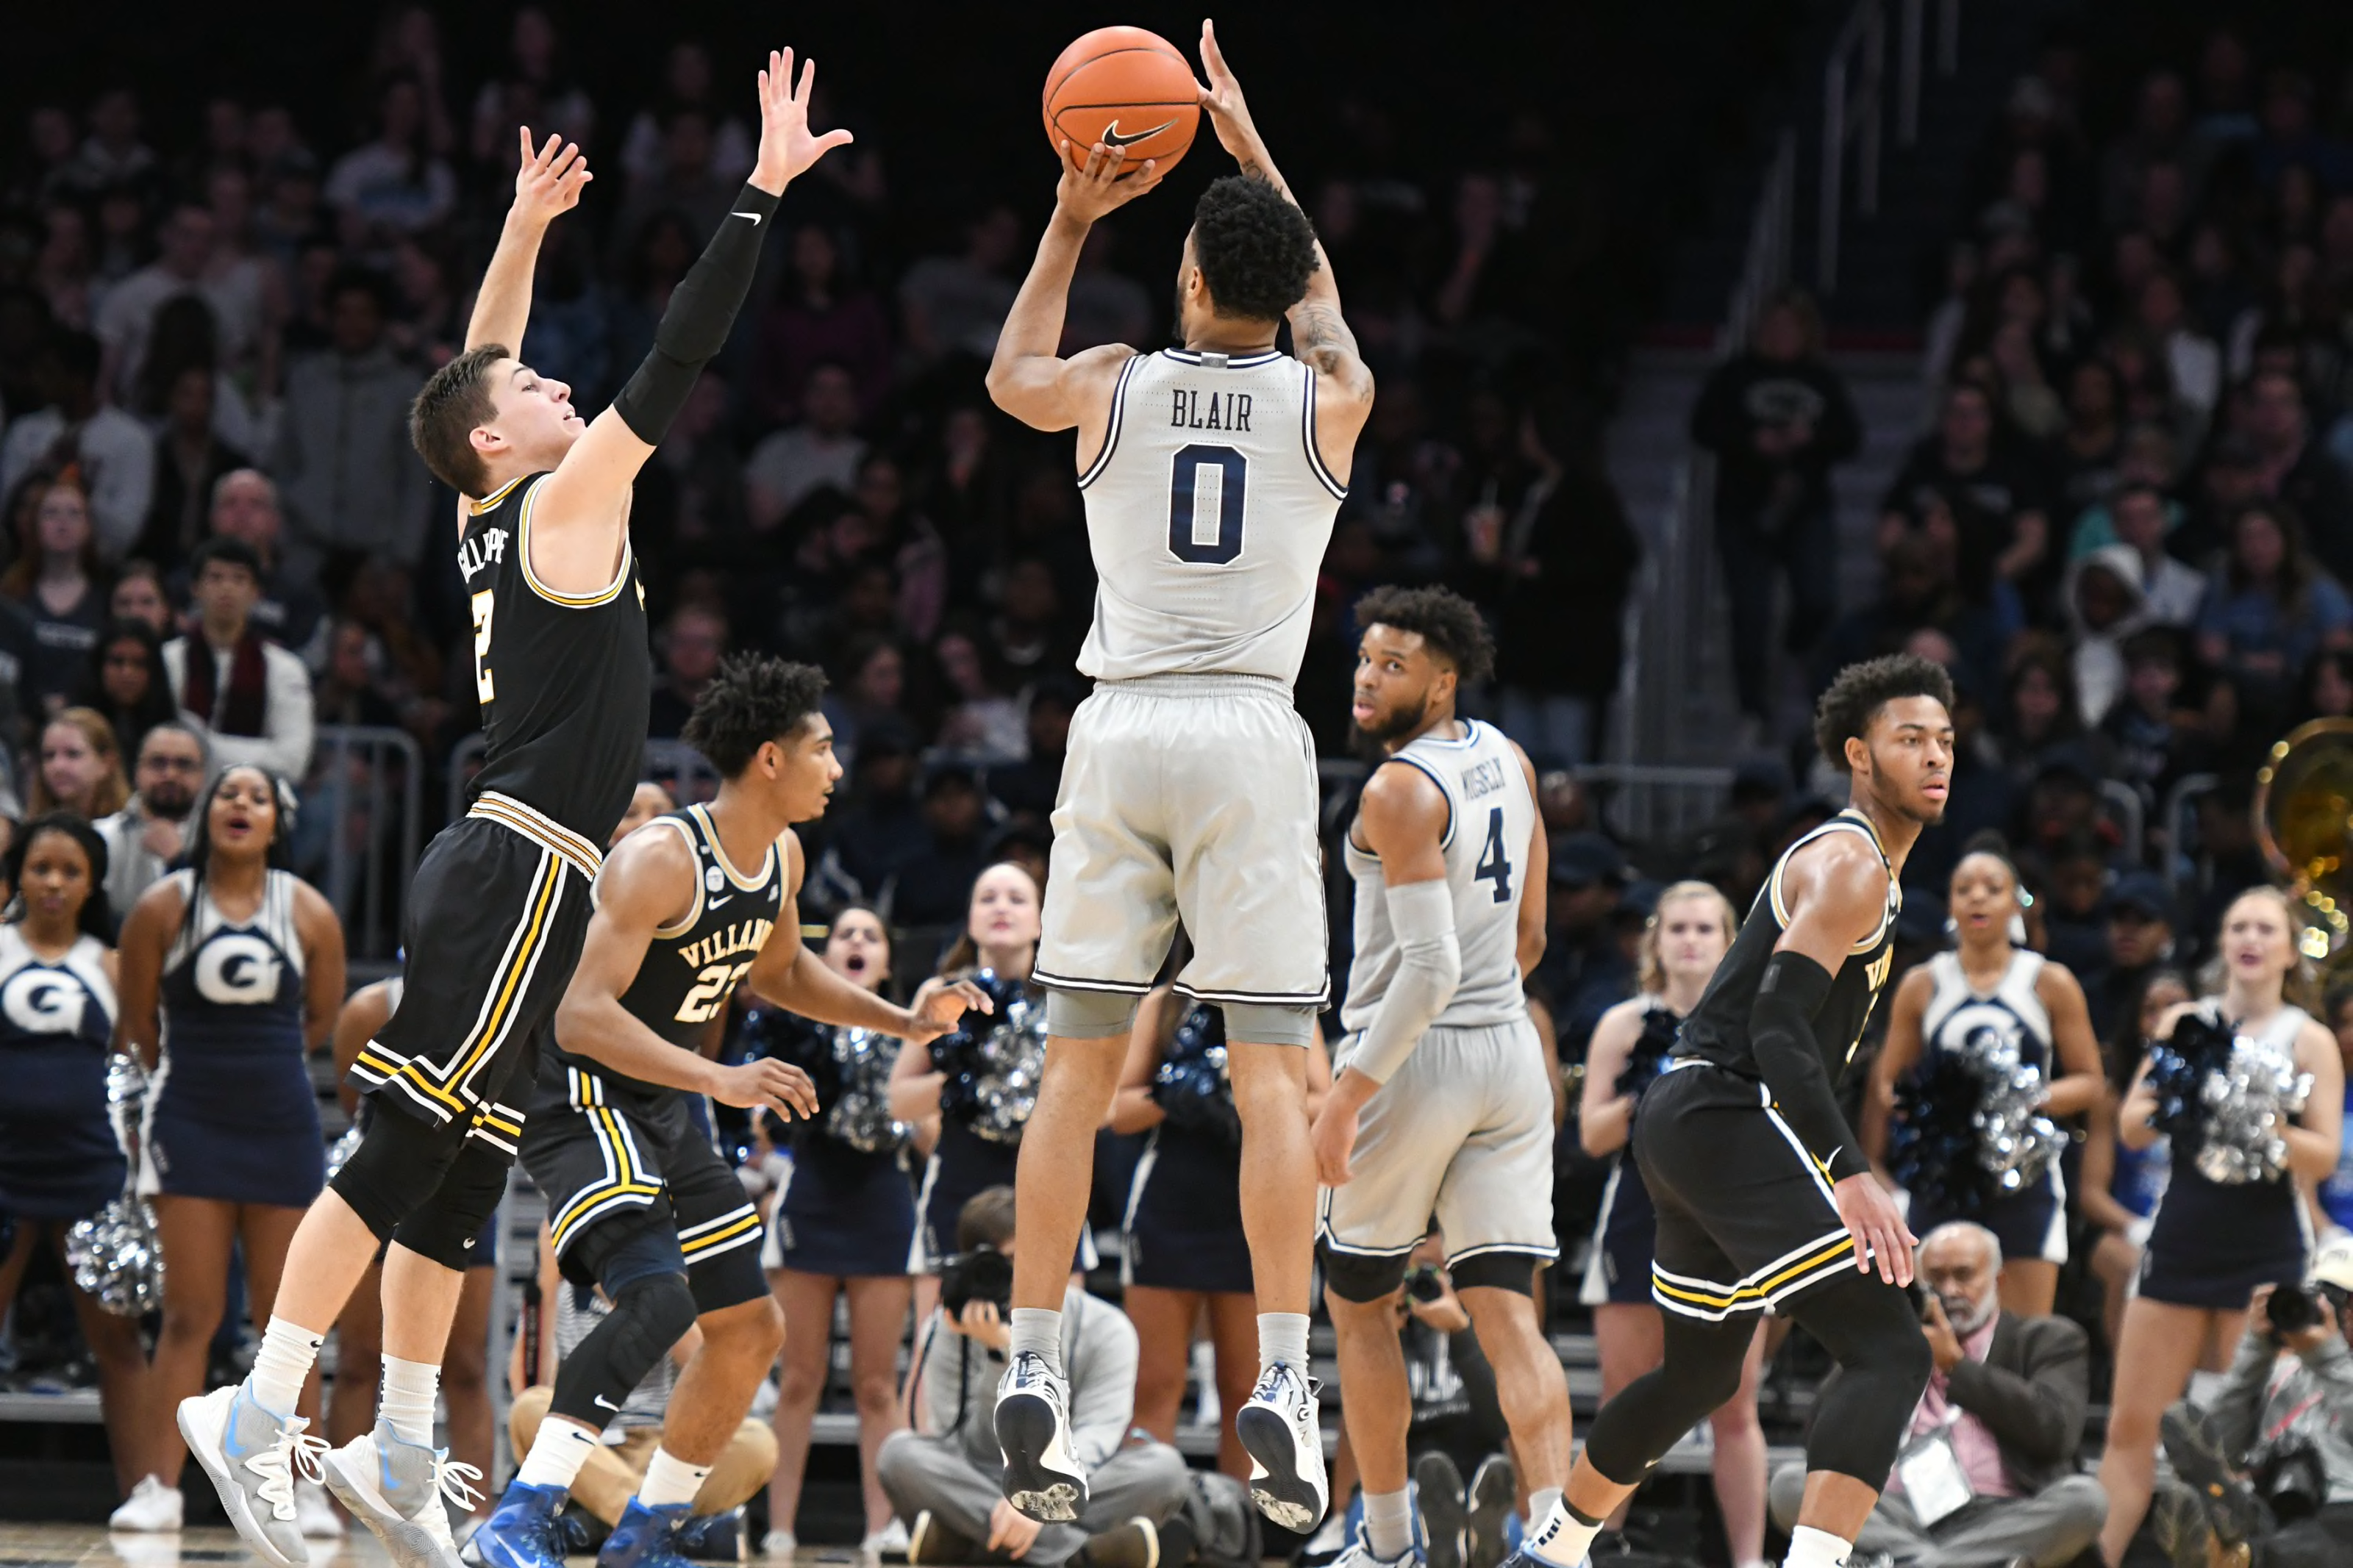 Georgetown Basketball: 2020-21 season preview for the Hoyas - Page 2